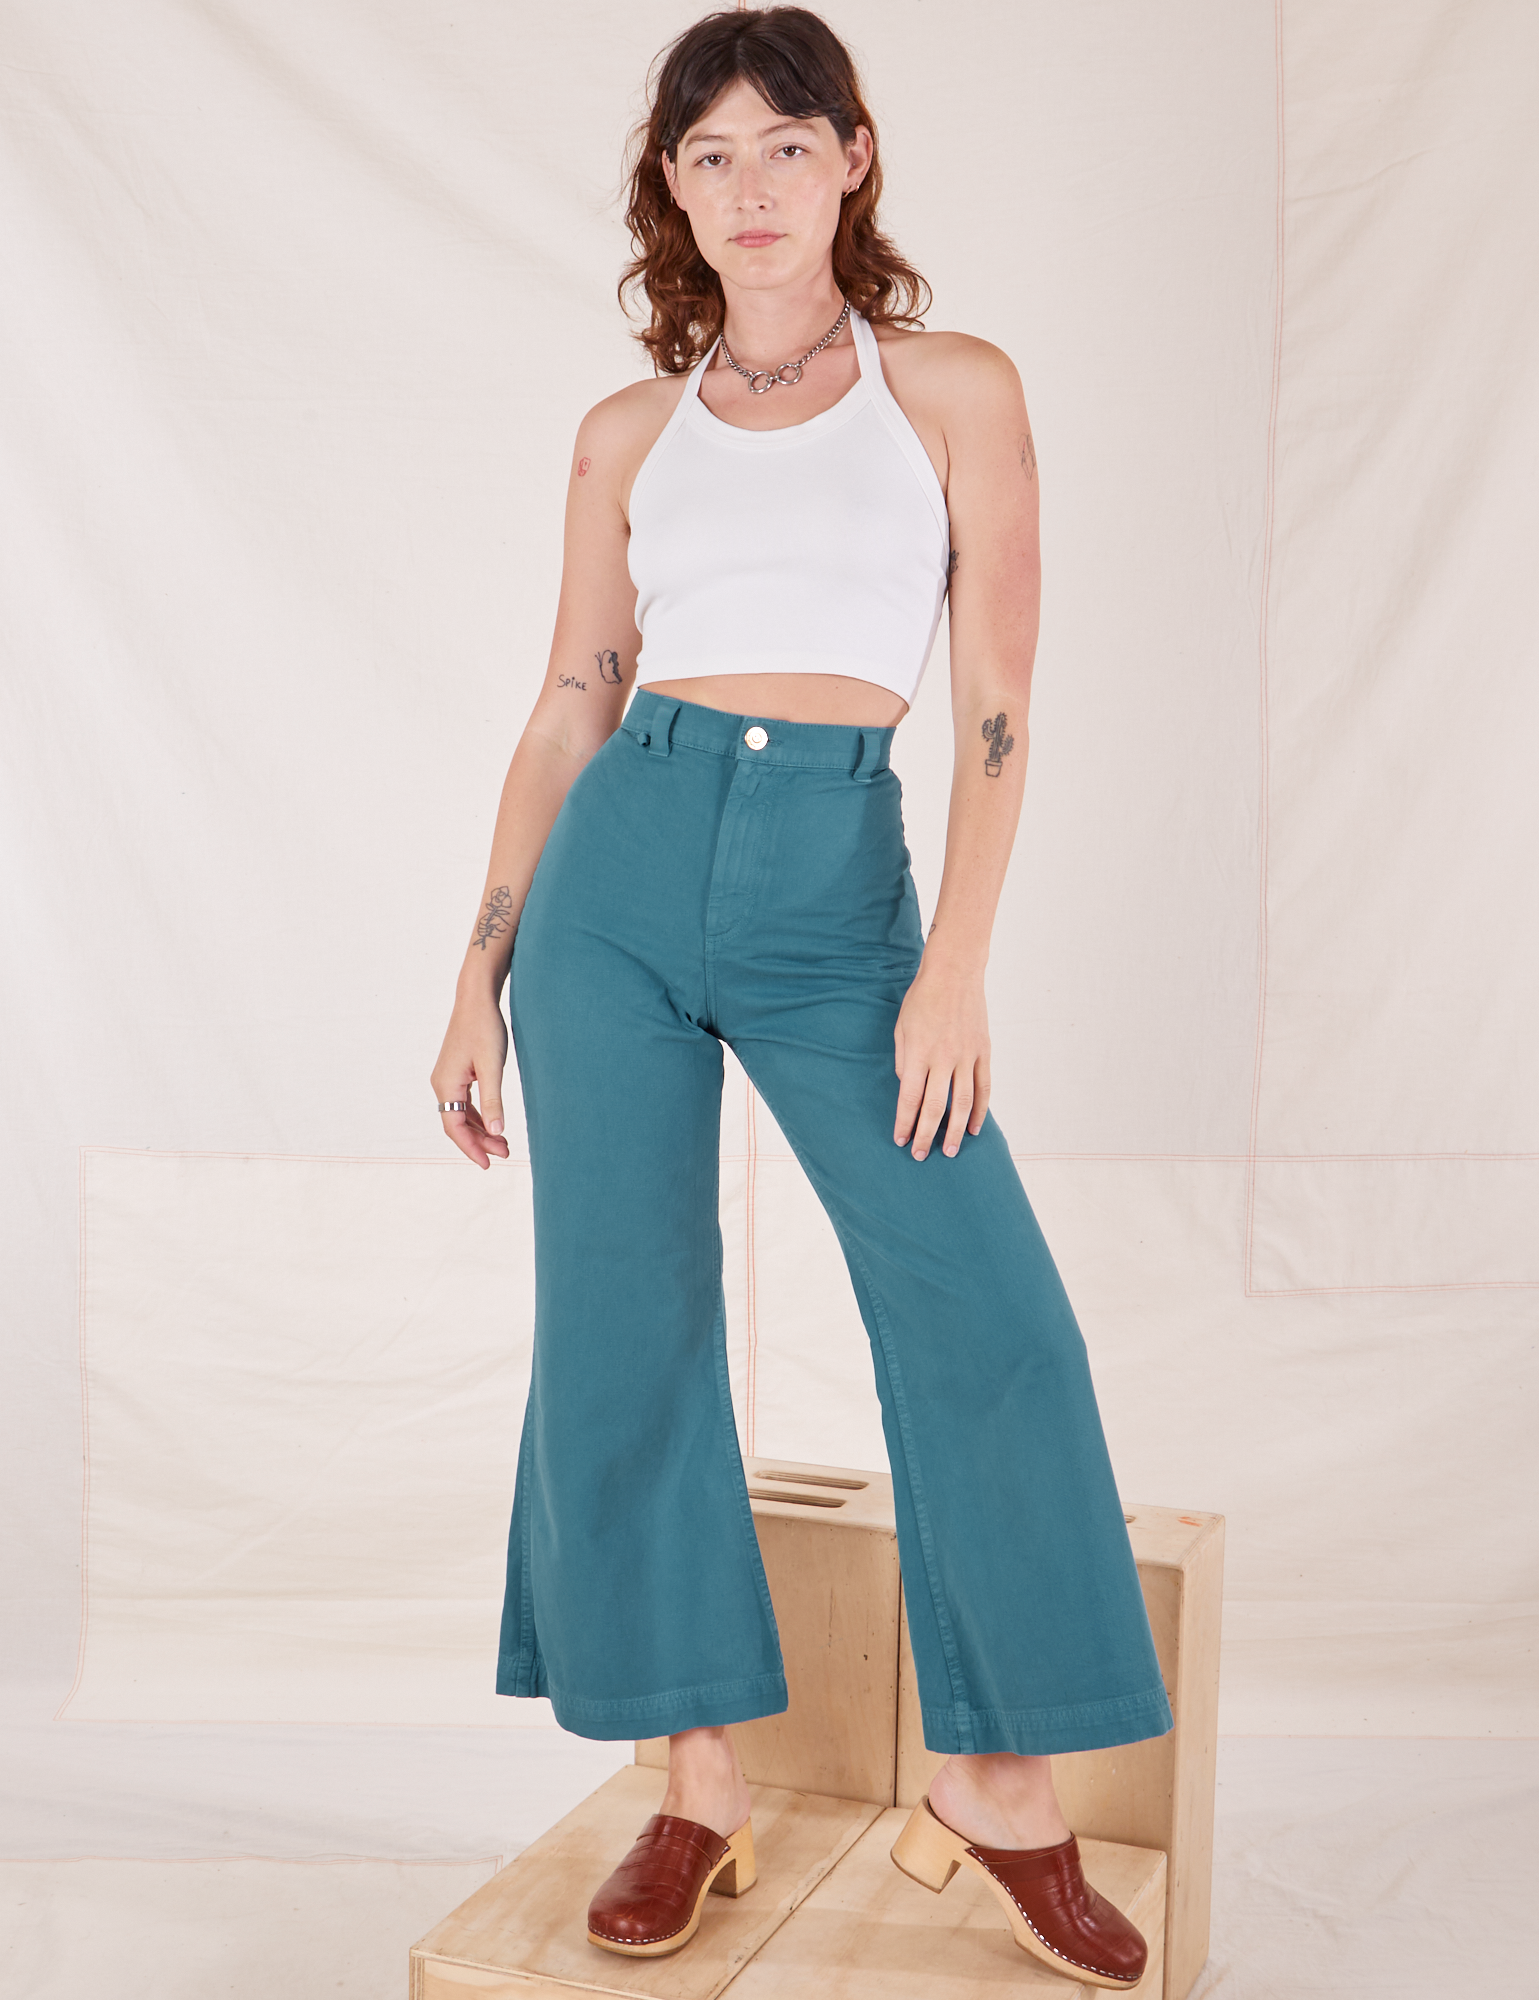 Alex is 5'8" and wearing XXS Bell Bottoms in Marine Blue paired with Halter Top in vintage tee off-white